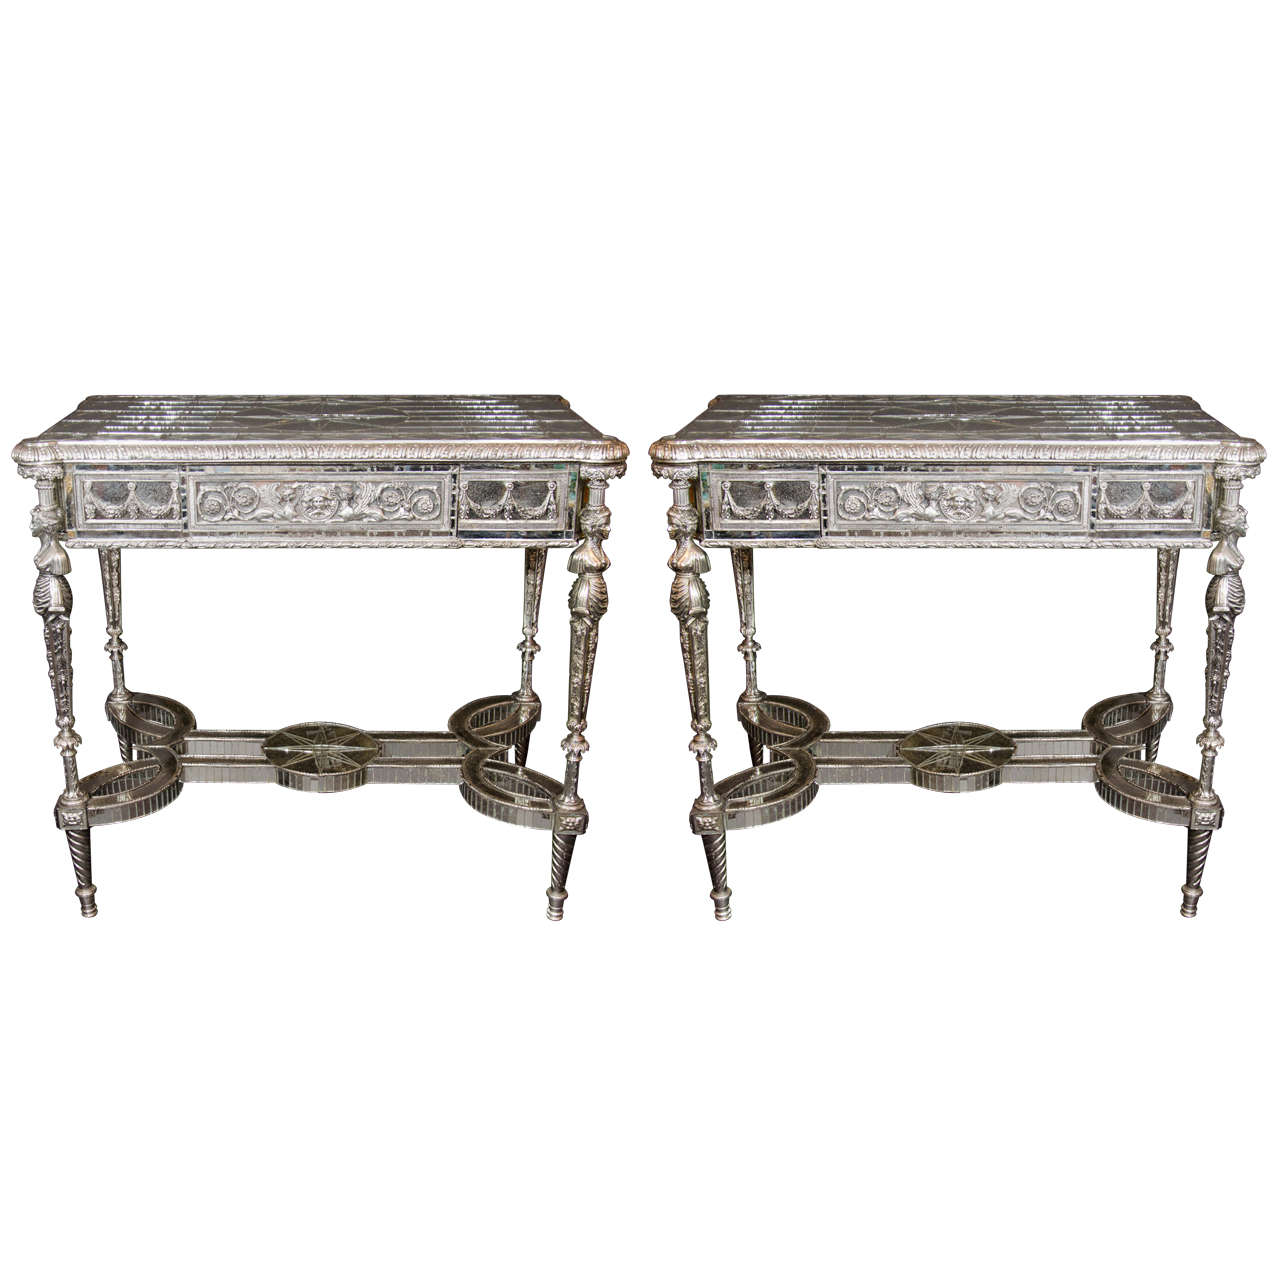 Pair of Unique French Louis XVI Style Silvered Bronze Mirrored Tables